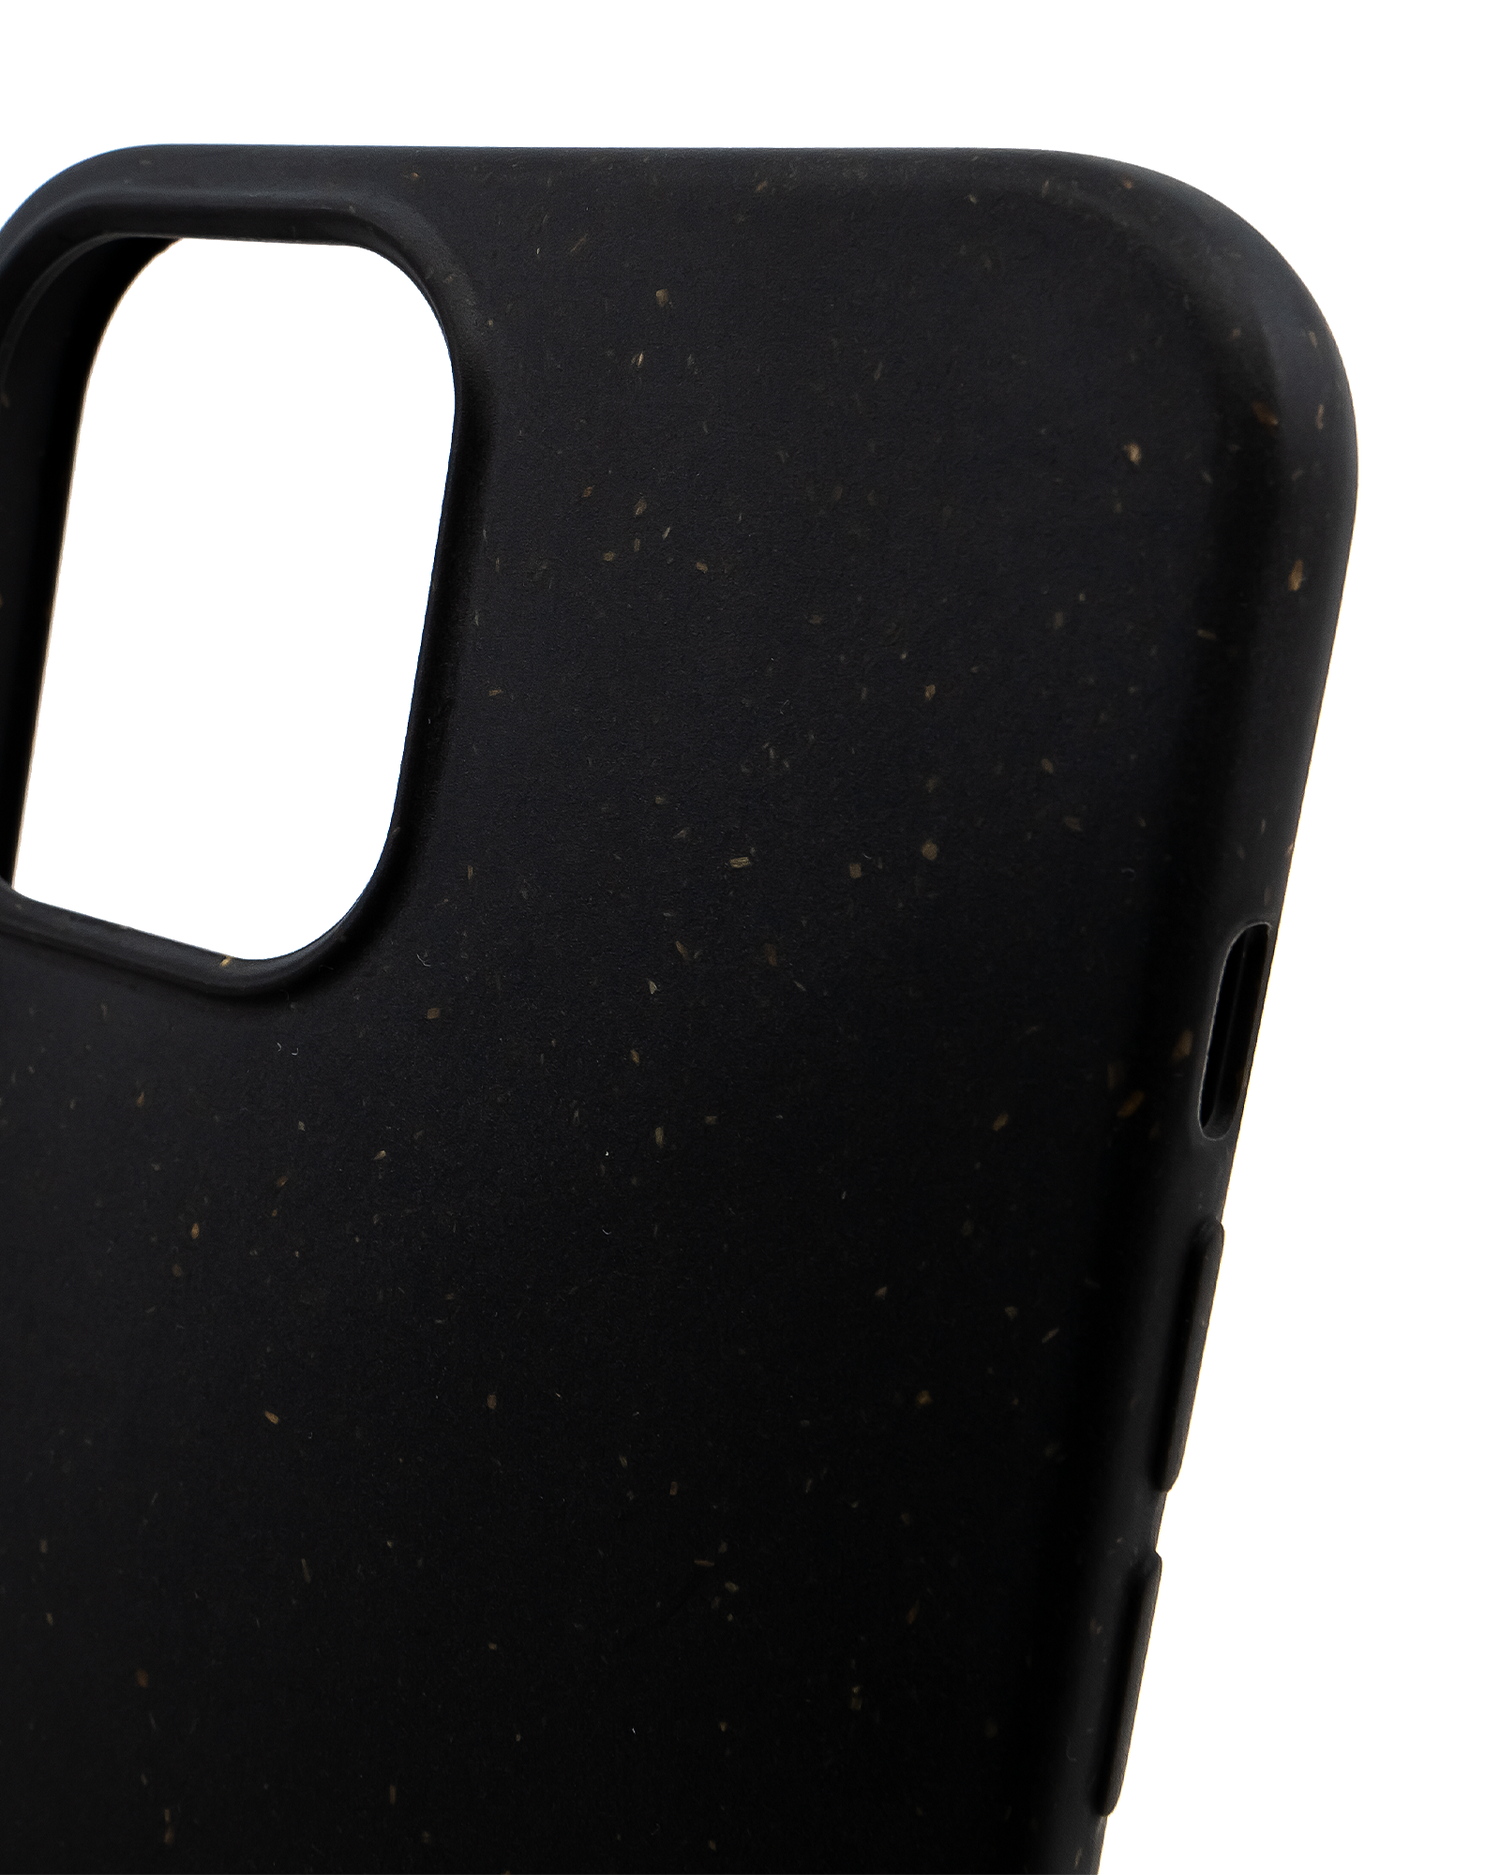 Black Eco-Friendly Phone Case for Apple iPhone 12 Pro Max: Details outside